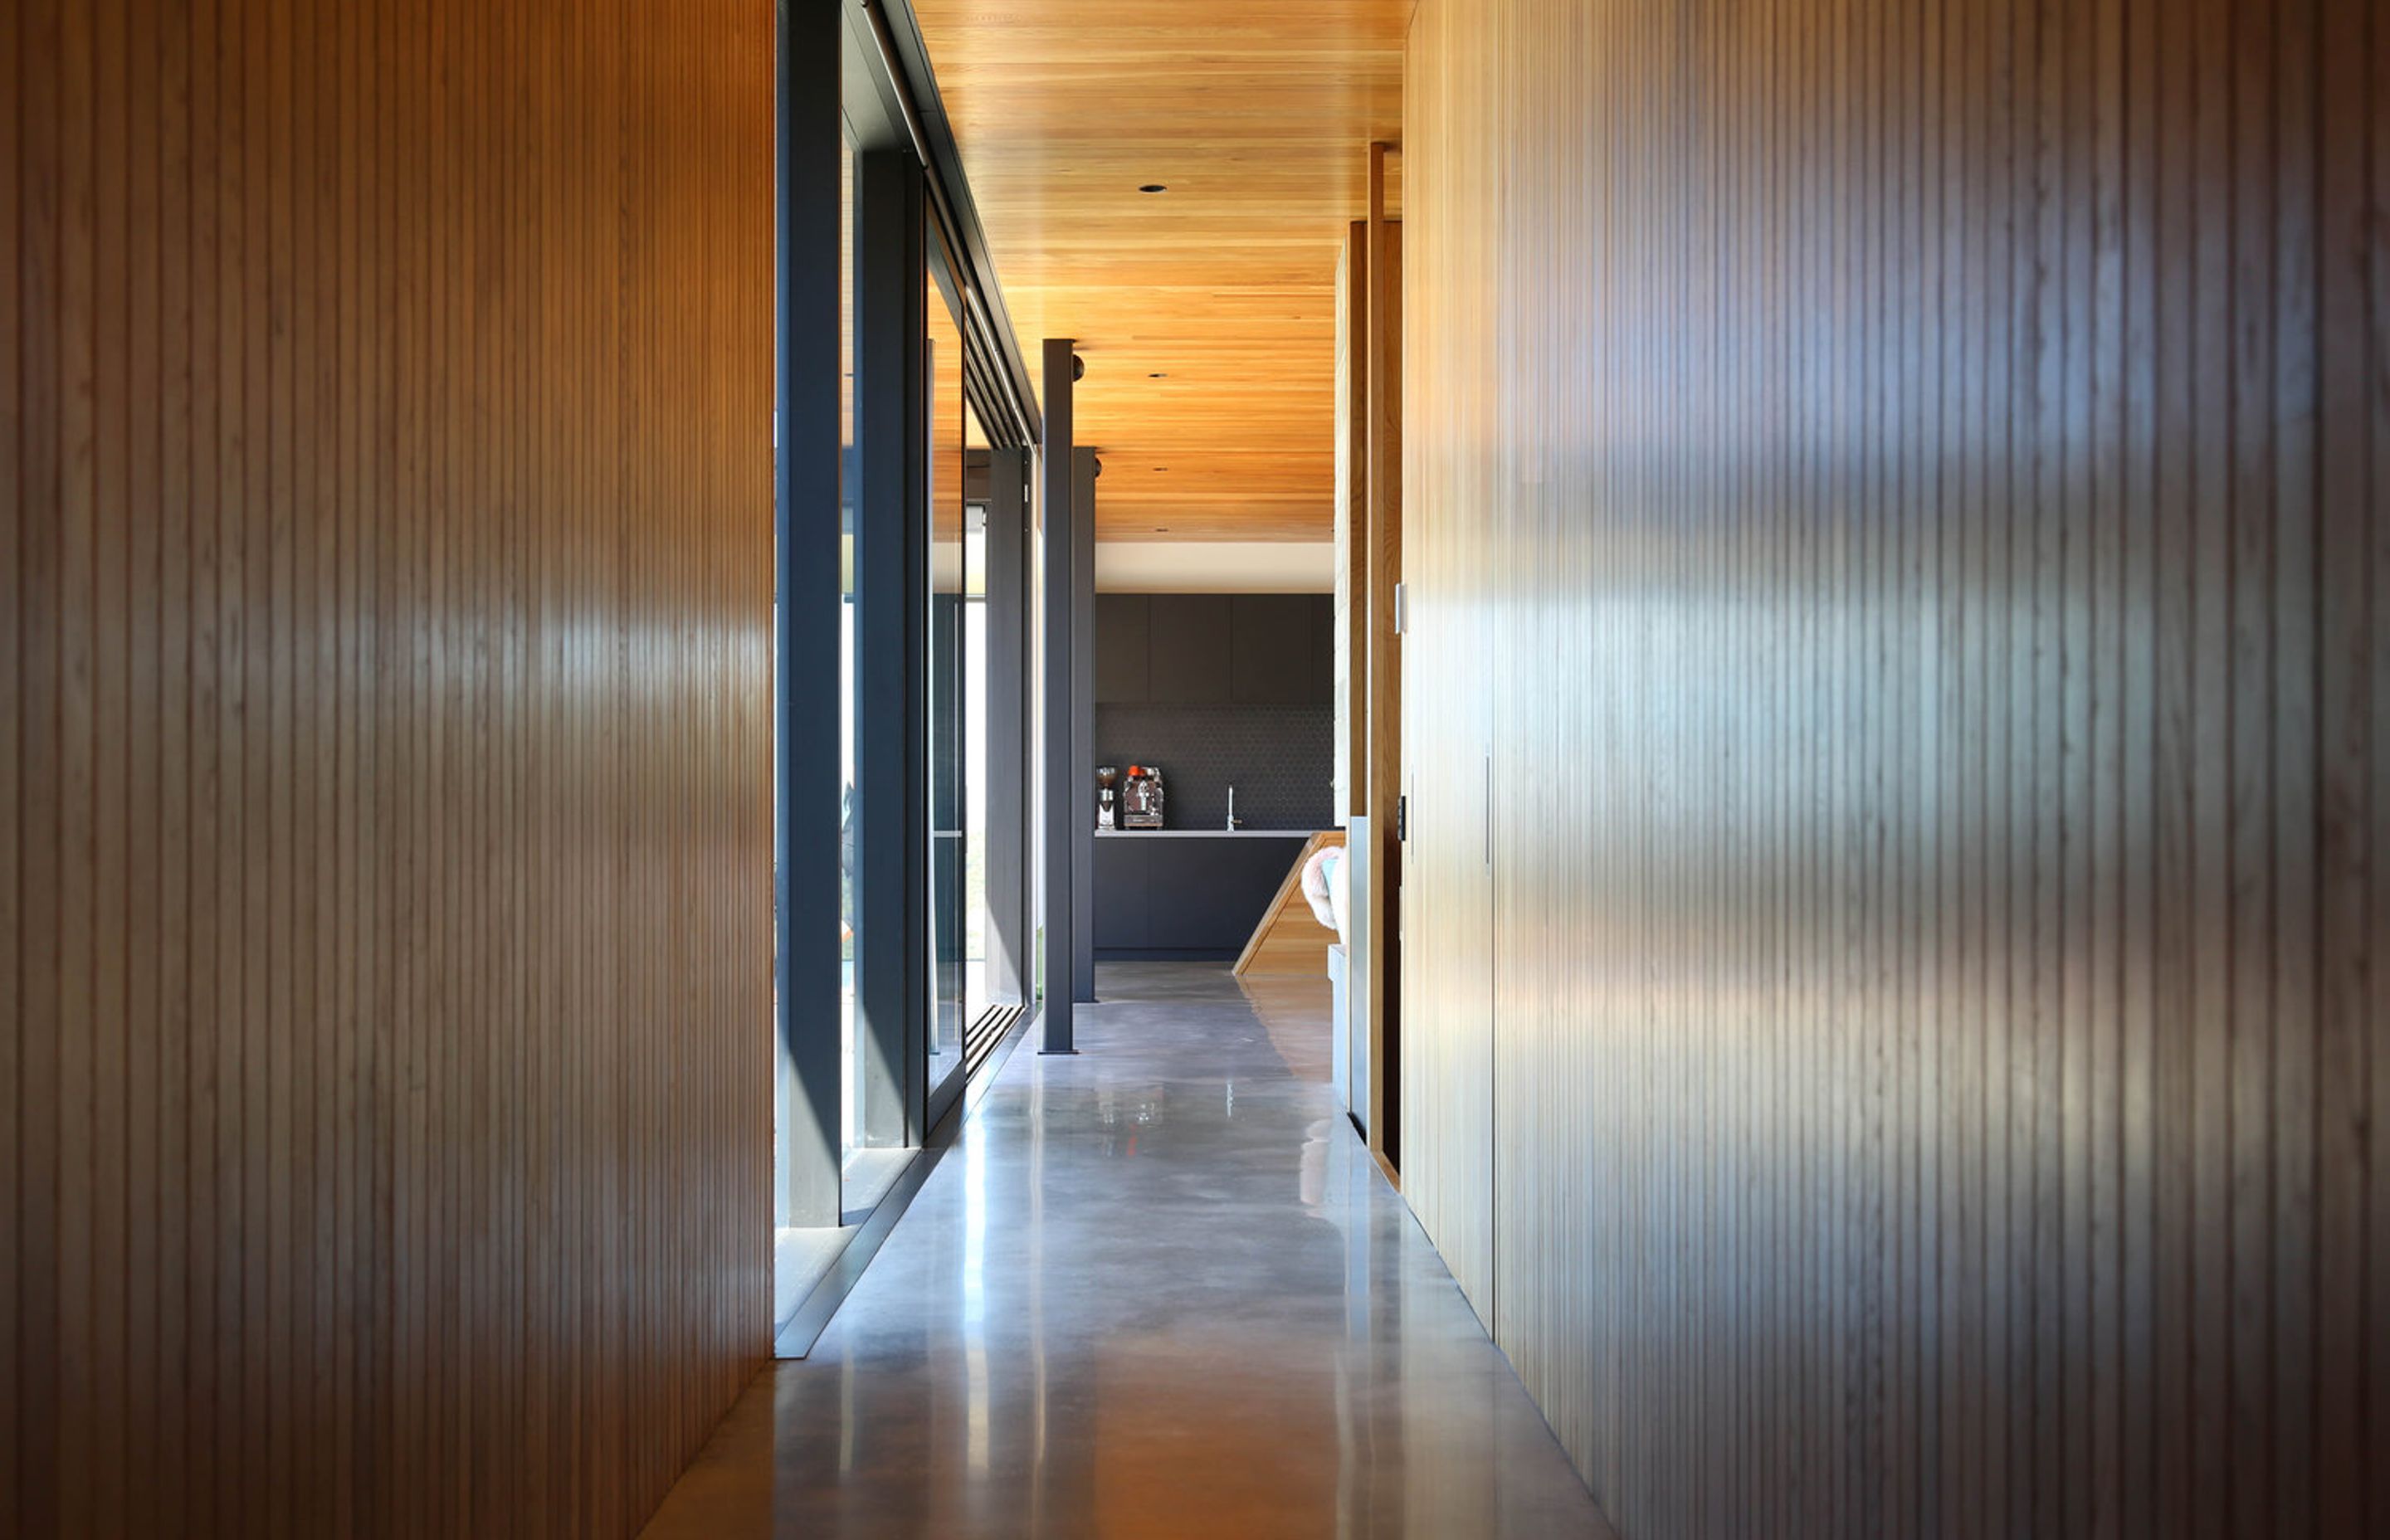 The natural oak-lined corridor from the entry to the kitchen has a polished concrete floor and black aluminium joinery.